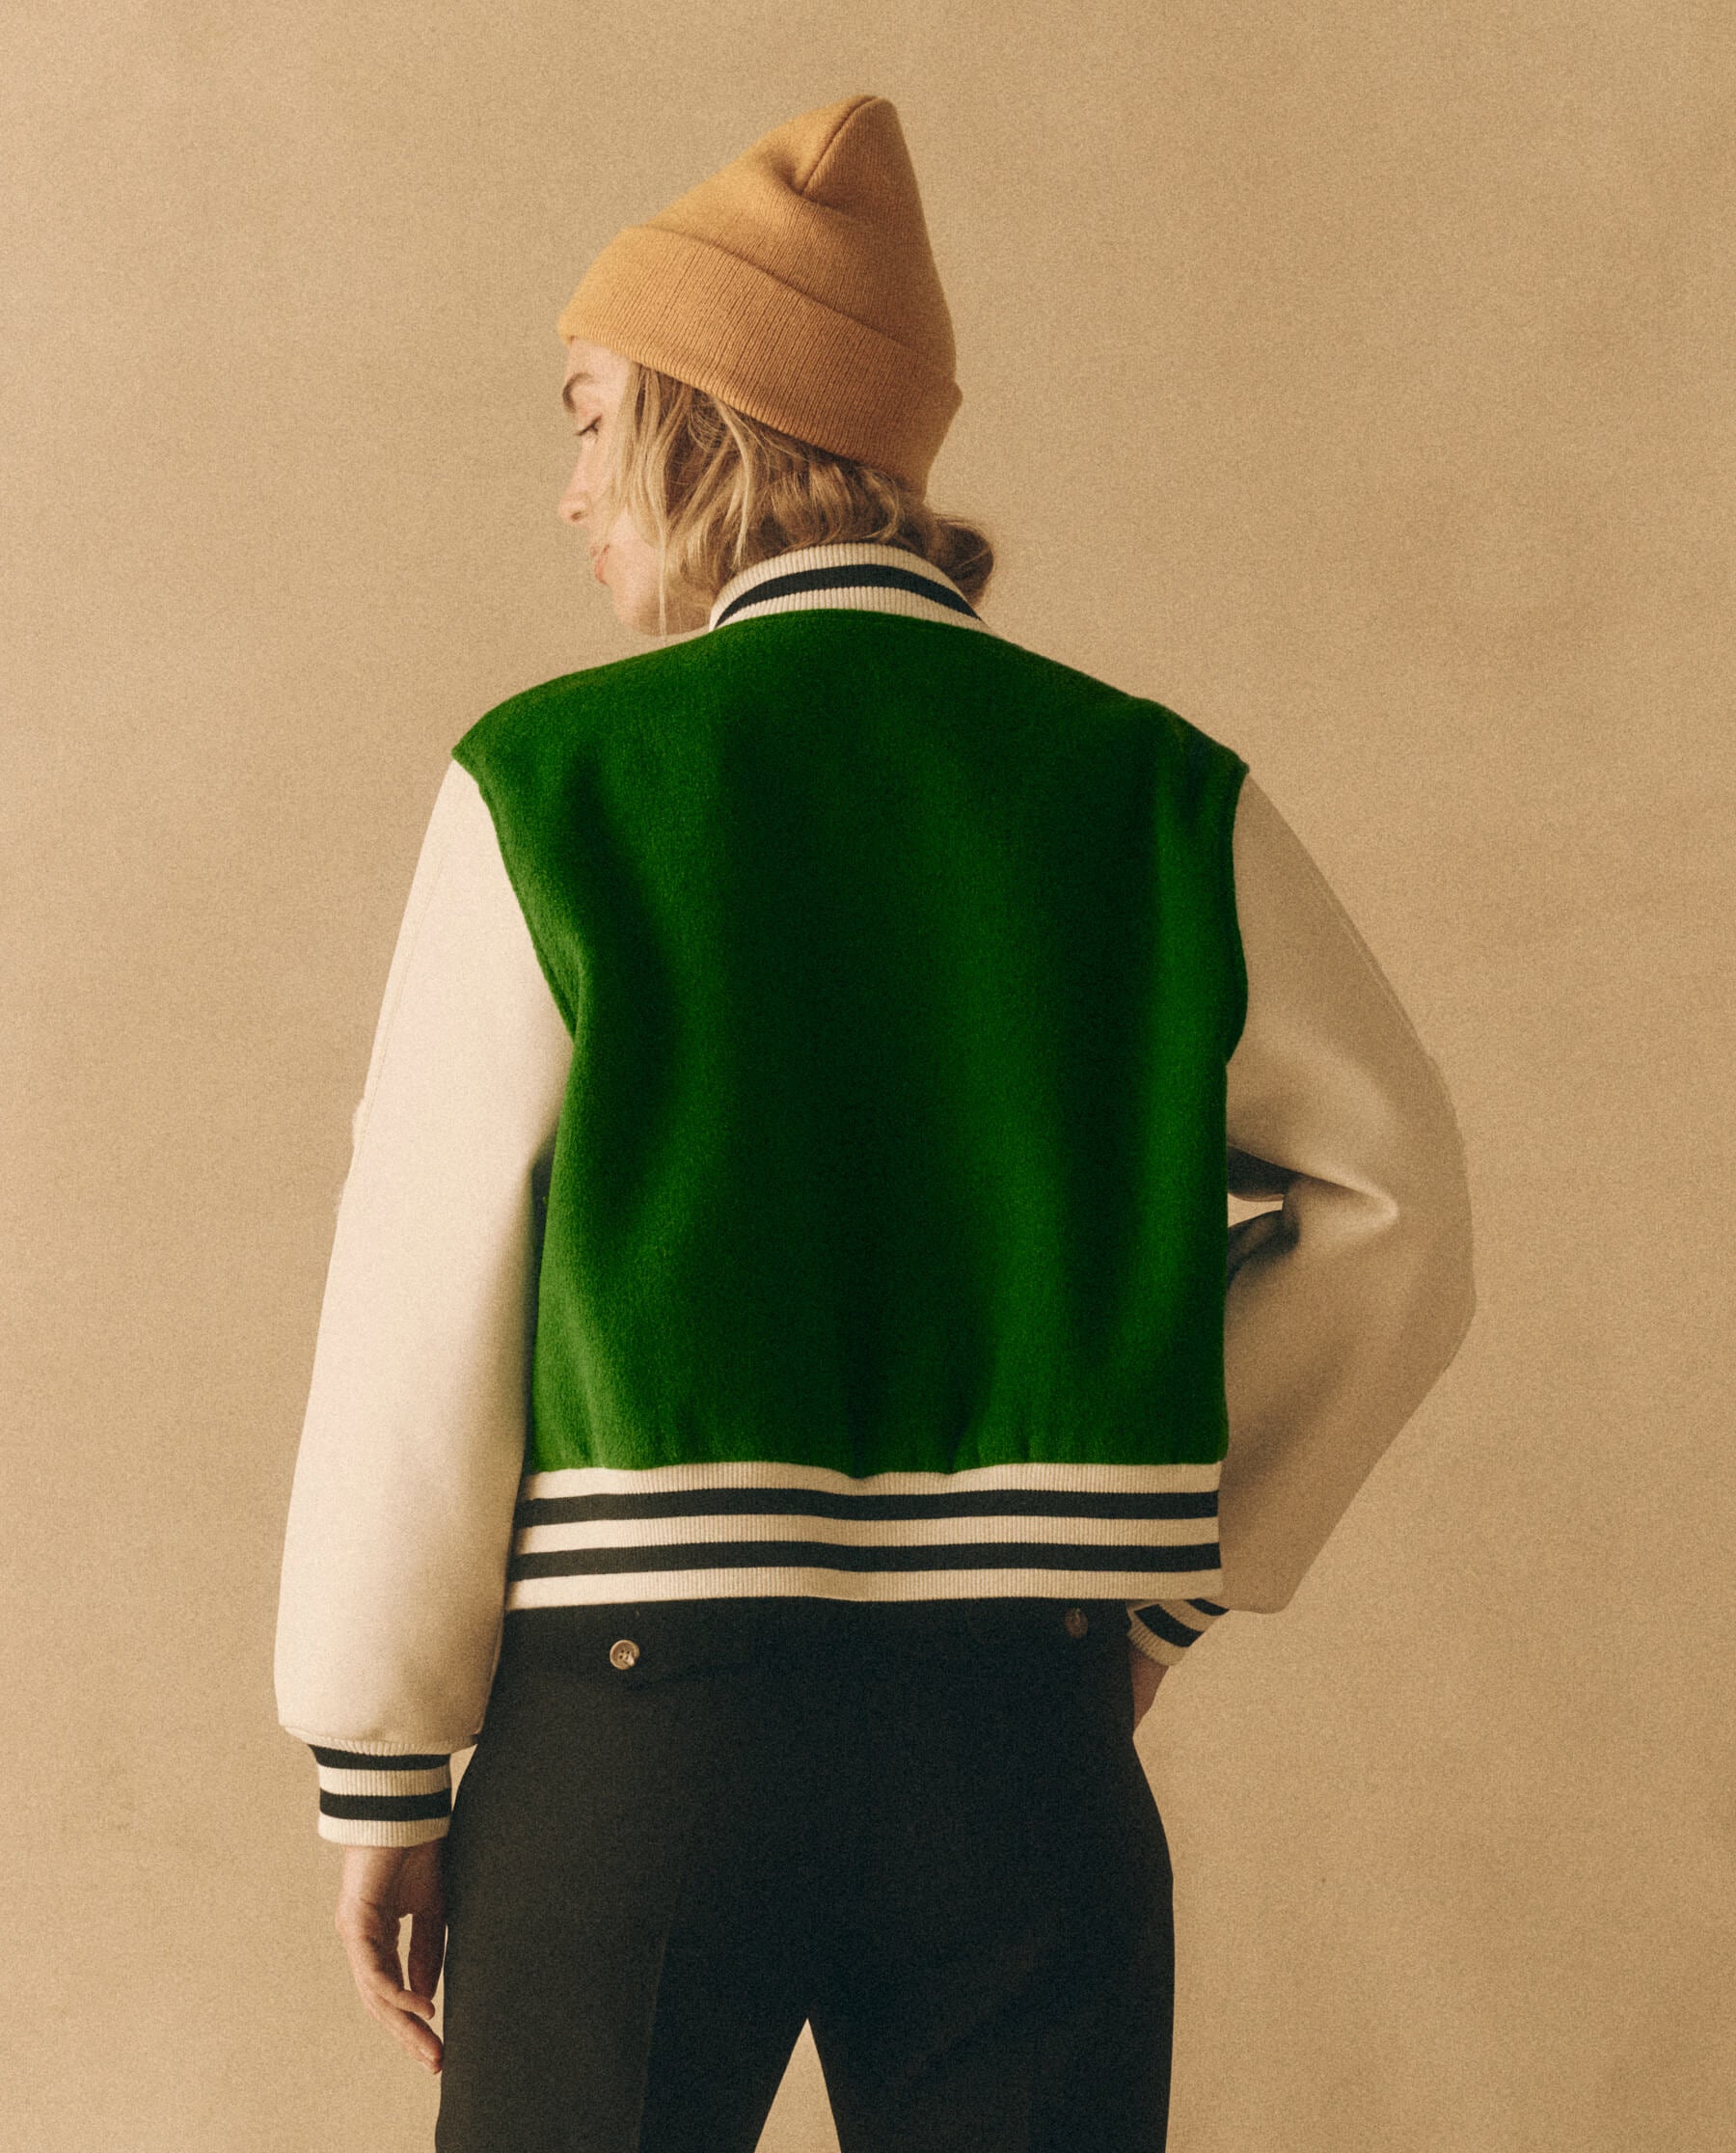 The Varsity Bomber. -- Field Green JACKET THE GREAT. HOL 23 D1 SALE